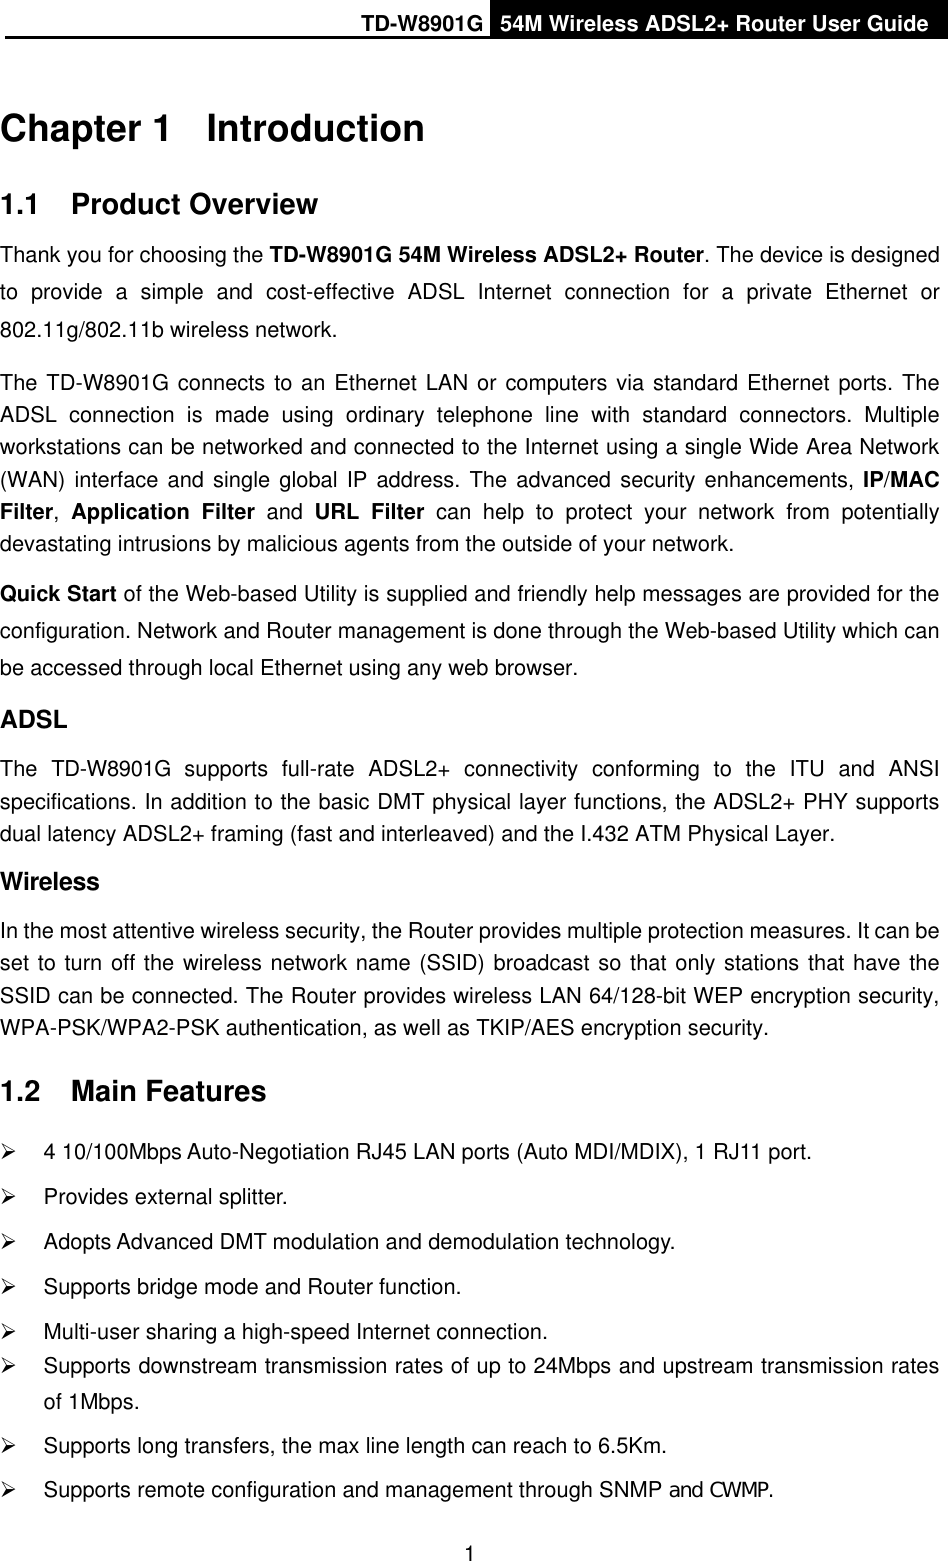 TD-W8901G 54M Wireless ADSL2+ Router User Guide1Chapter 1  Introduction1.1 Product Overview Thank you for choosing the TD-W8901G 54M Wireless ADSL2+ Router. The device is designed to provide a simple and cost-effective ADSL Internet connection for a private Ethernet or 802.11g/802.11b wireless network. The TD-W8901G connects to an Ethernet LAN or computers via standard Ethernet ports. The ADSL connection is made using ordinary telephone line with standard connectors. Multiple workstations can be networked and connected to the Internet using a single Wide Area Network (WAN) interface and single global IP address. The advanced security enhancements, IP/MACFilter,Application Filter and URL Filter can help to protect your network from potentially devastating intrusions by malicious agents from the outside of your network. Quick Start of the Web-based Utility is supplied and friendly help messages are provided for the configuration. Network and Router management is done through the Web-based Utility which can be accessed through local Ethernet using any web browser. ADSLThe TD-W8901G supports full-rate ADSL2+ connectivity conforming to the ITU and ANSI specifications. In addition to the basic DMT physical layer functions, the ADSL2+ PHY supports dual latency ADSL2+ framing (fast and interleaved) and the I.432 ATM Physical Layer. WirelessIn the most attentive wireless security, the Router provides multiple protection measures. It can be set to turn off the wireless network name (SSID) broadcast so that only stations that have the SSID can be connected. The Router provides wireless LAN 64/128-bit WEP encryption security, WPA-PSK/WPA2-PSK authentication, as well as TKIP/AES encryption security. 1.2 Main Features ¾  4 10/100Mbps Auto-Negotiation RJ45 LAN ports (Auto MDI/MDIX), 1 RJ11 port. ¾  Provides external splitter. ¾  Adopts Advanced DMT modulation and demodulation technology. ¾  Supports bridge mode and Router function. ¾  Multi-user sharing a high-speed Internet connection. ¾  Supports downstream transmission rates of up to 24Mbps and upstream transmission rates of 1Mbps. ¾  Supports long transfers, the max line length can reach to 6.5Km. ¾  Supports remote configuration and management through SNMP and CWMP.